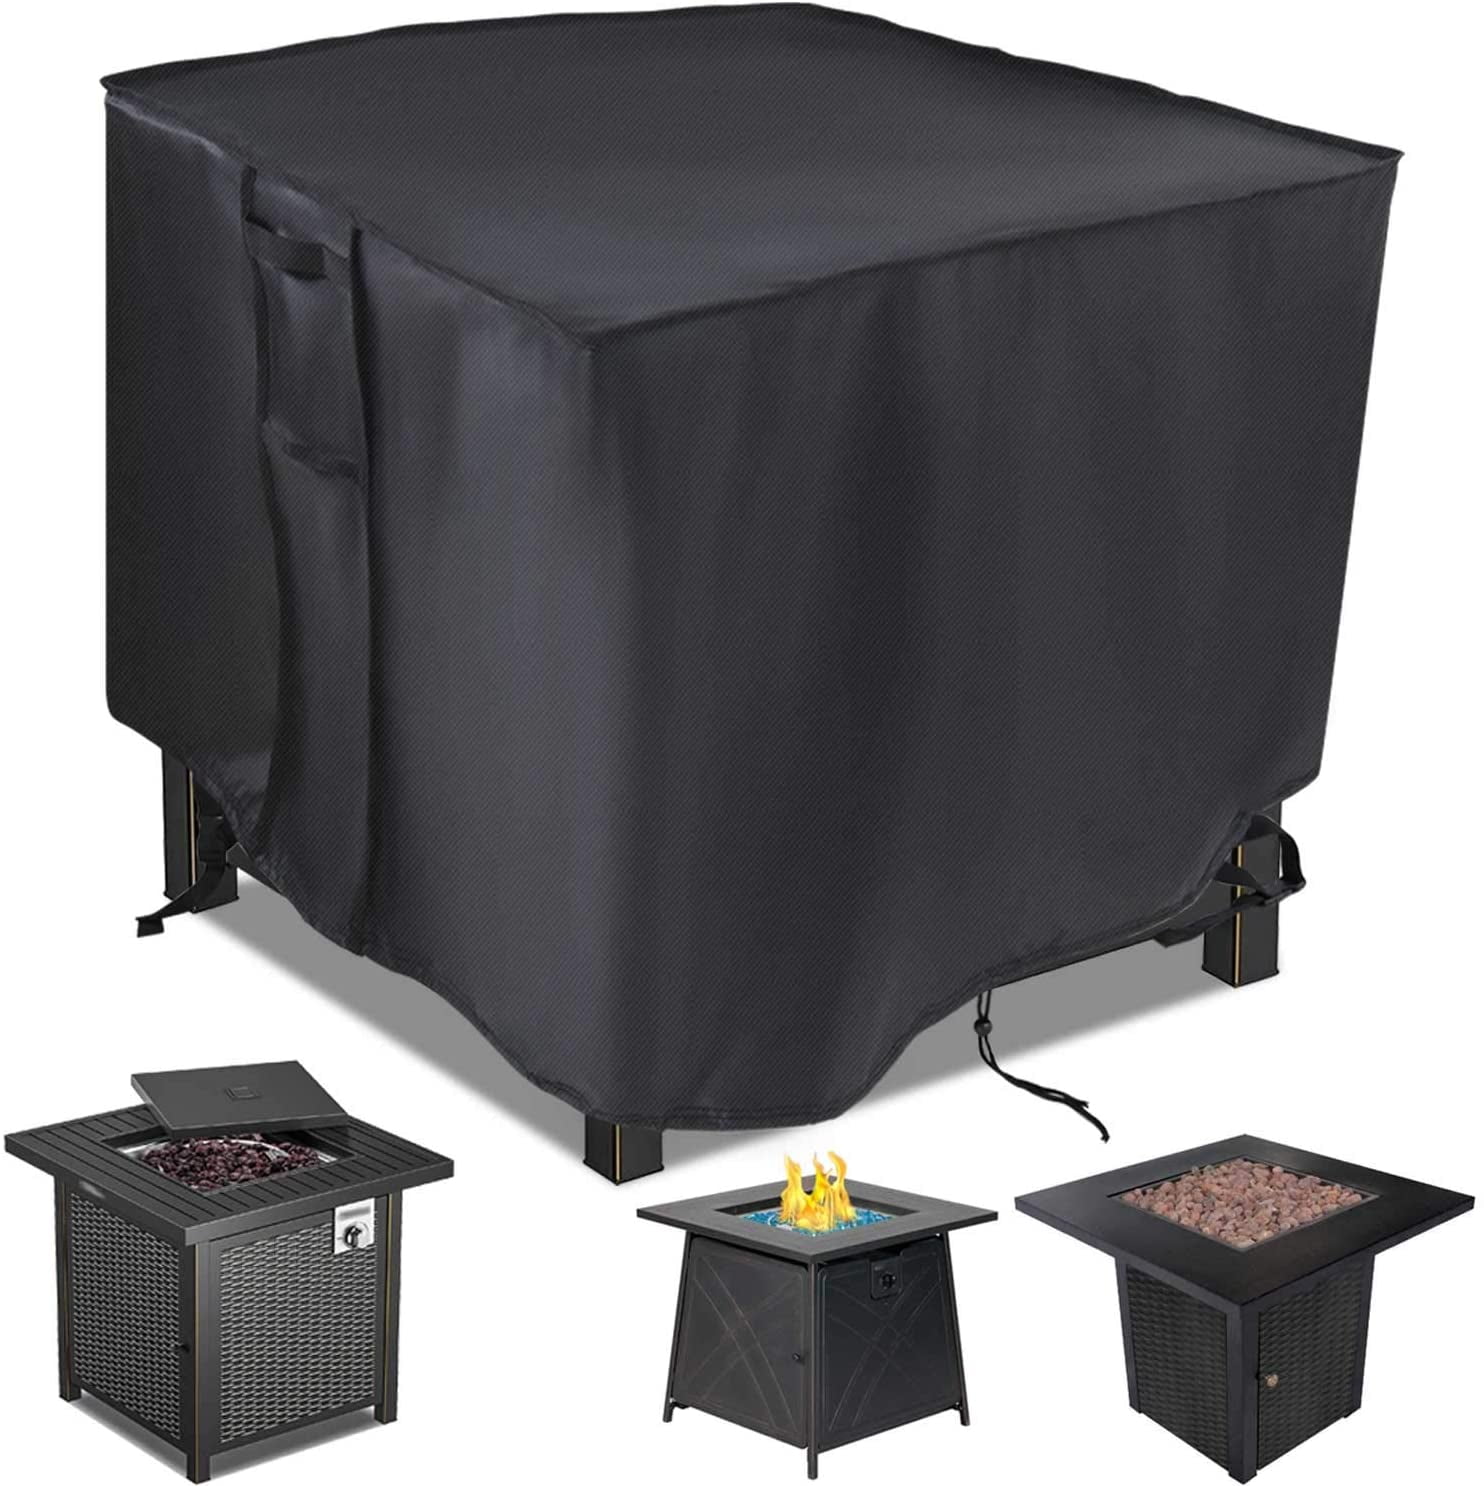 Square Fire Pit Cover Waterproof Fireplace Outdoor Protector 30"x 30" x25"